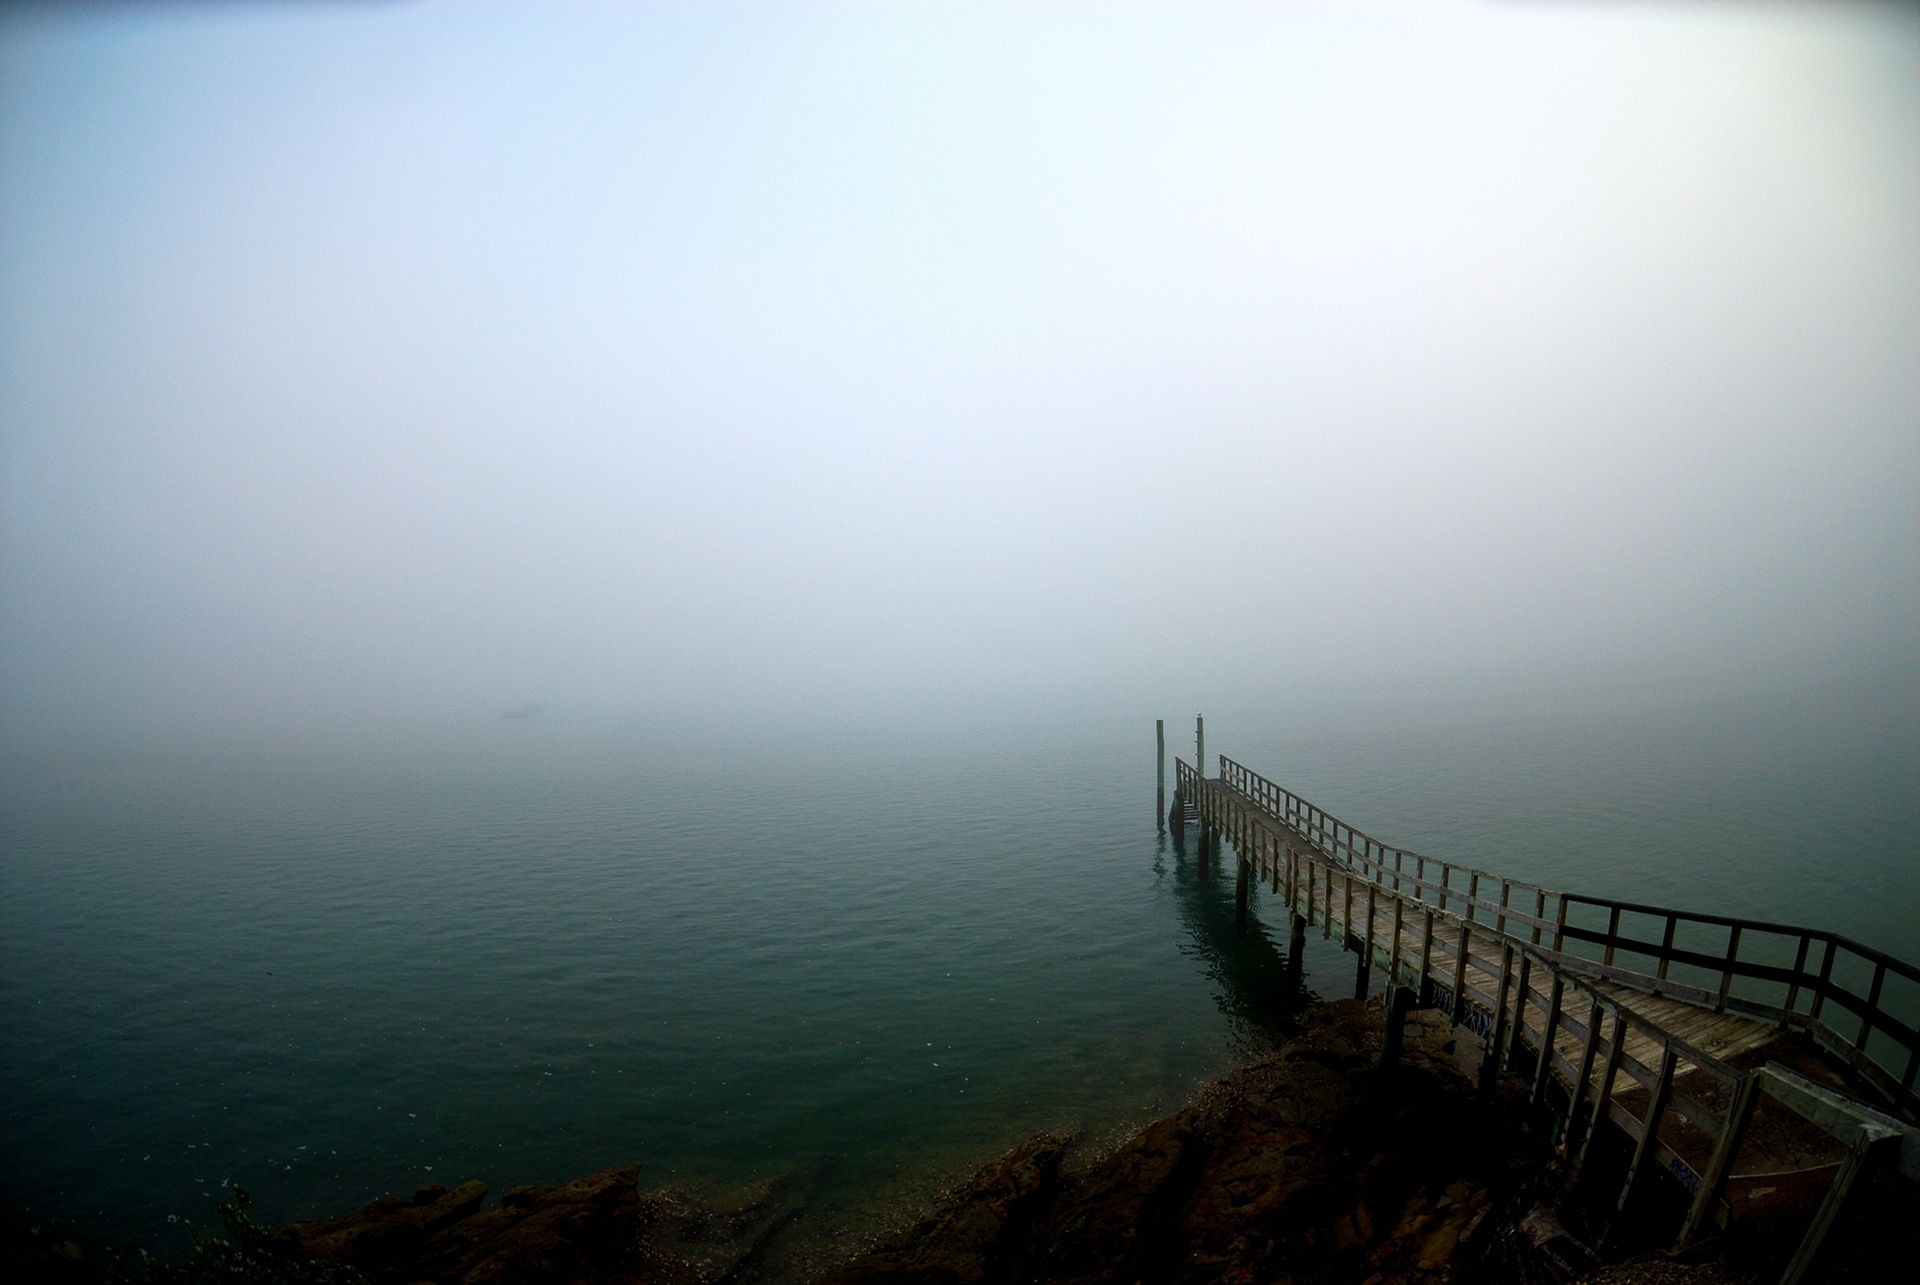 descent, nature, lake, pier, fog, unknown, obscurity